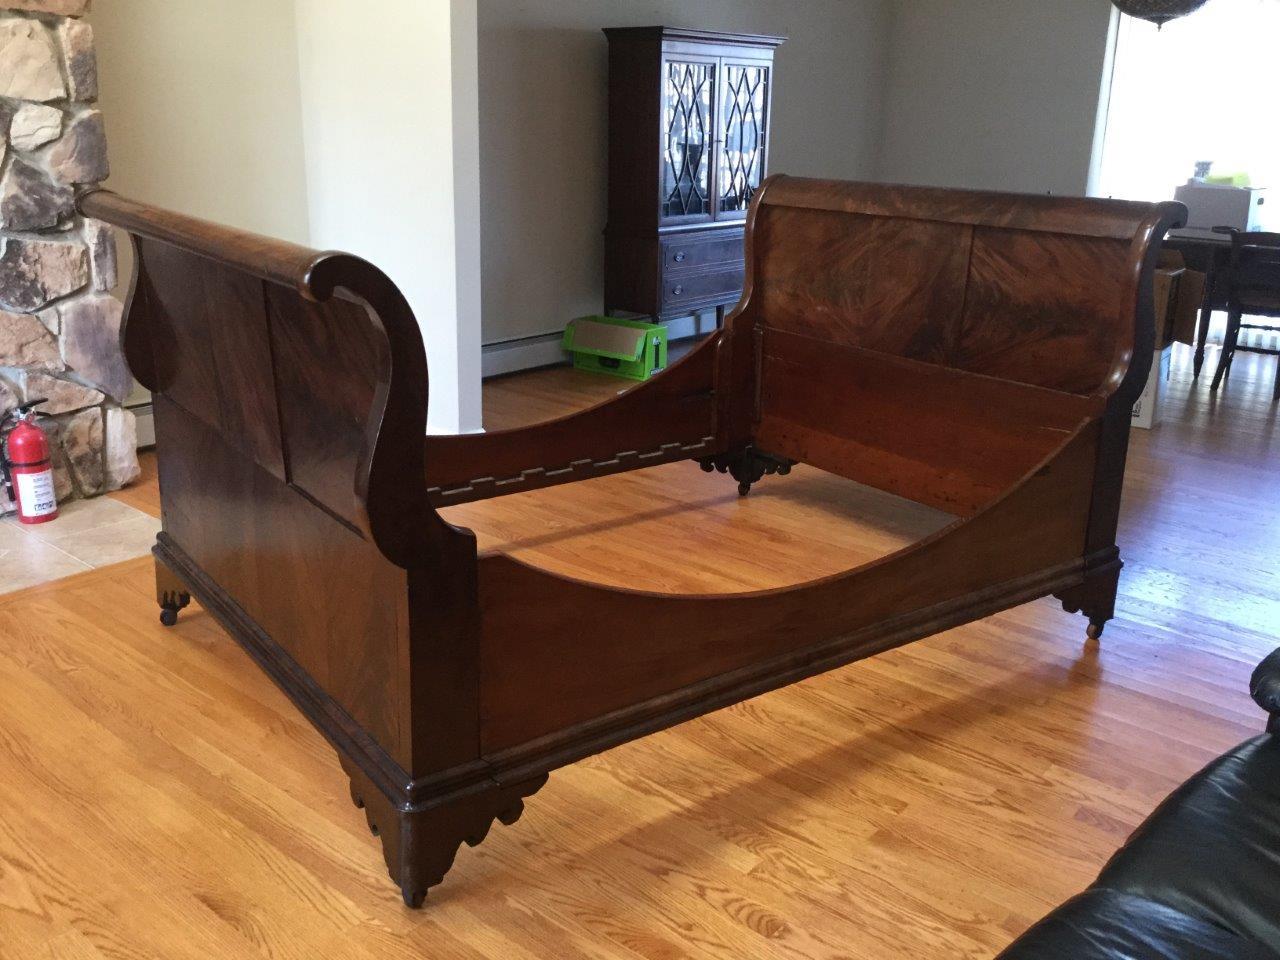 19th Century Stately Antique English Full Size Flame Mahogany Sleigh Bed Daybed